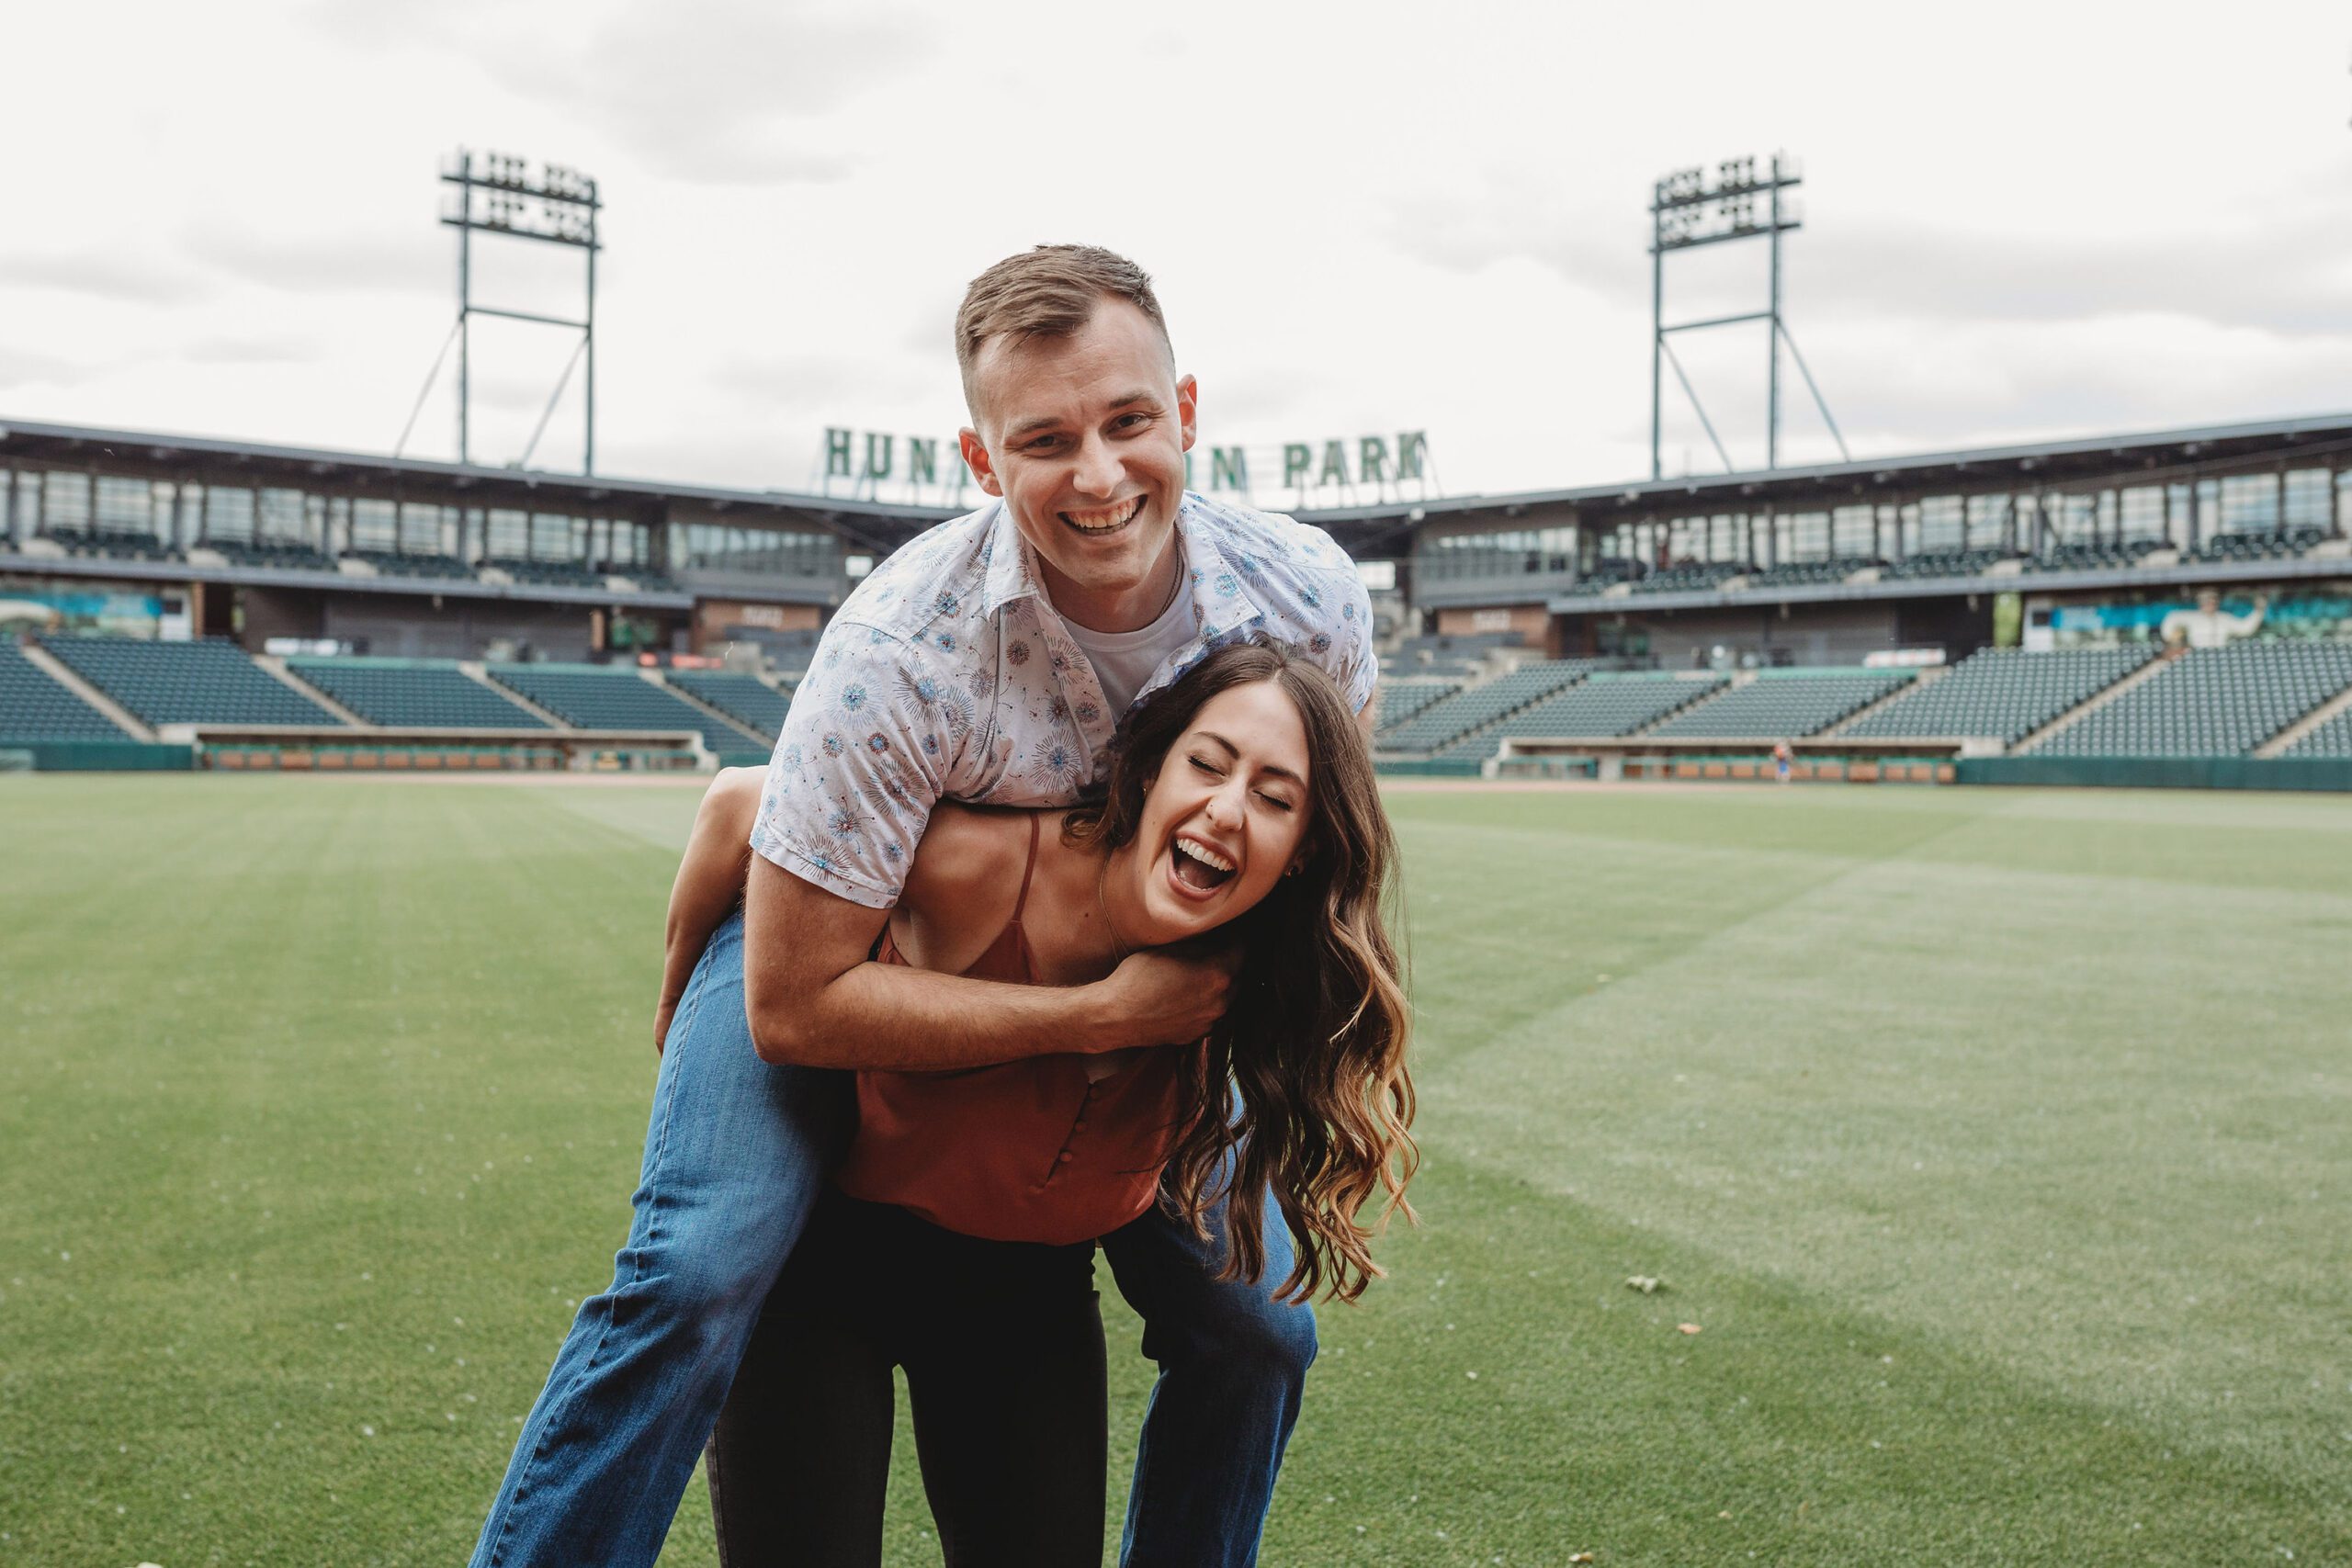 bride giving piggy back ride to fiancé in Columbus Ohio at Huntington park